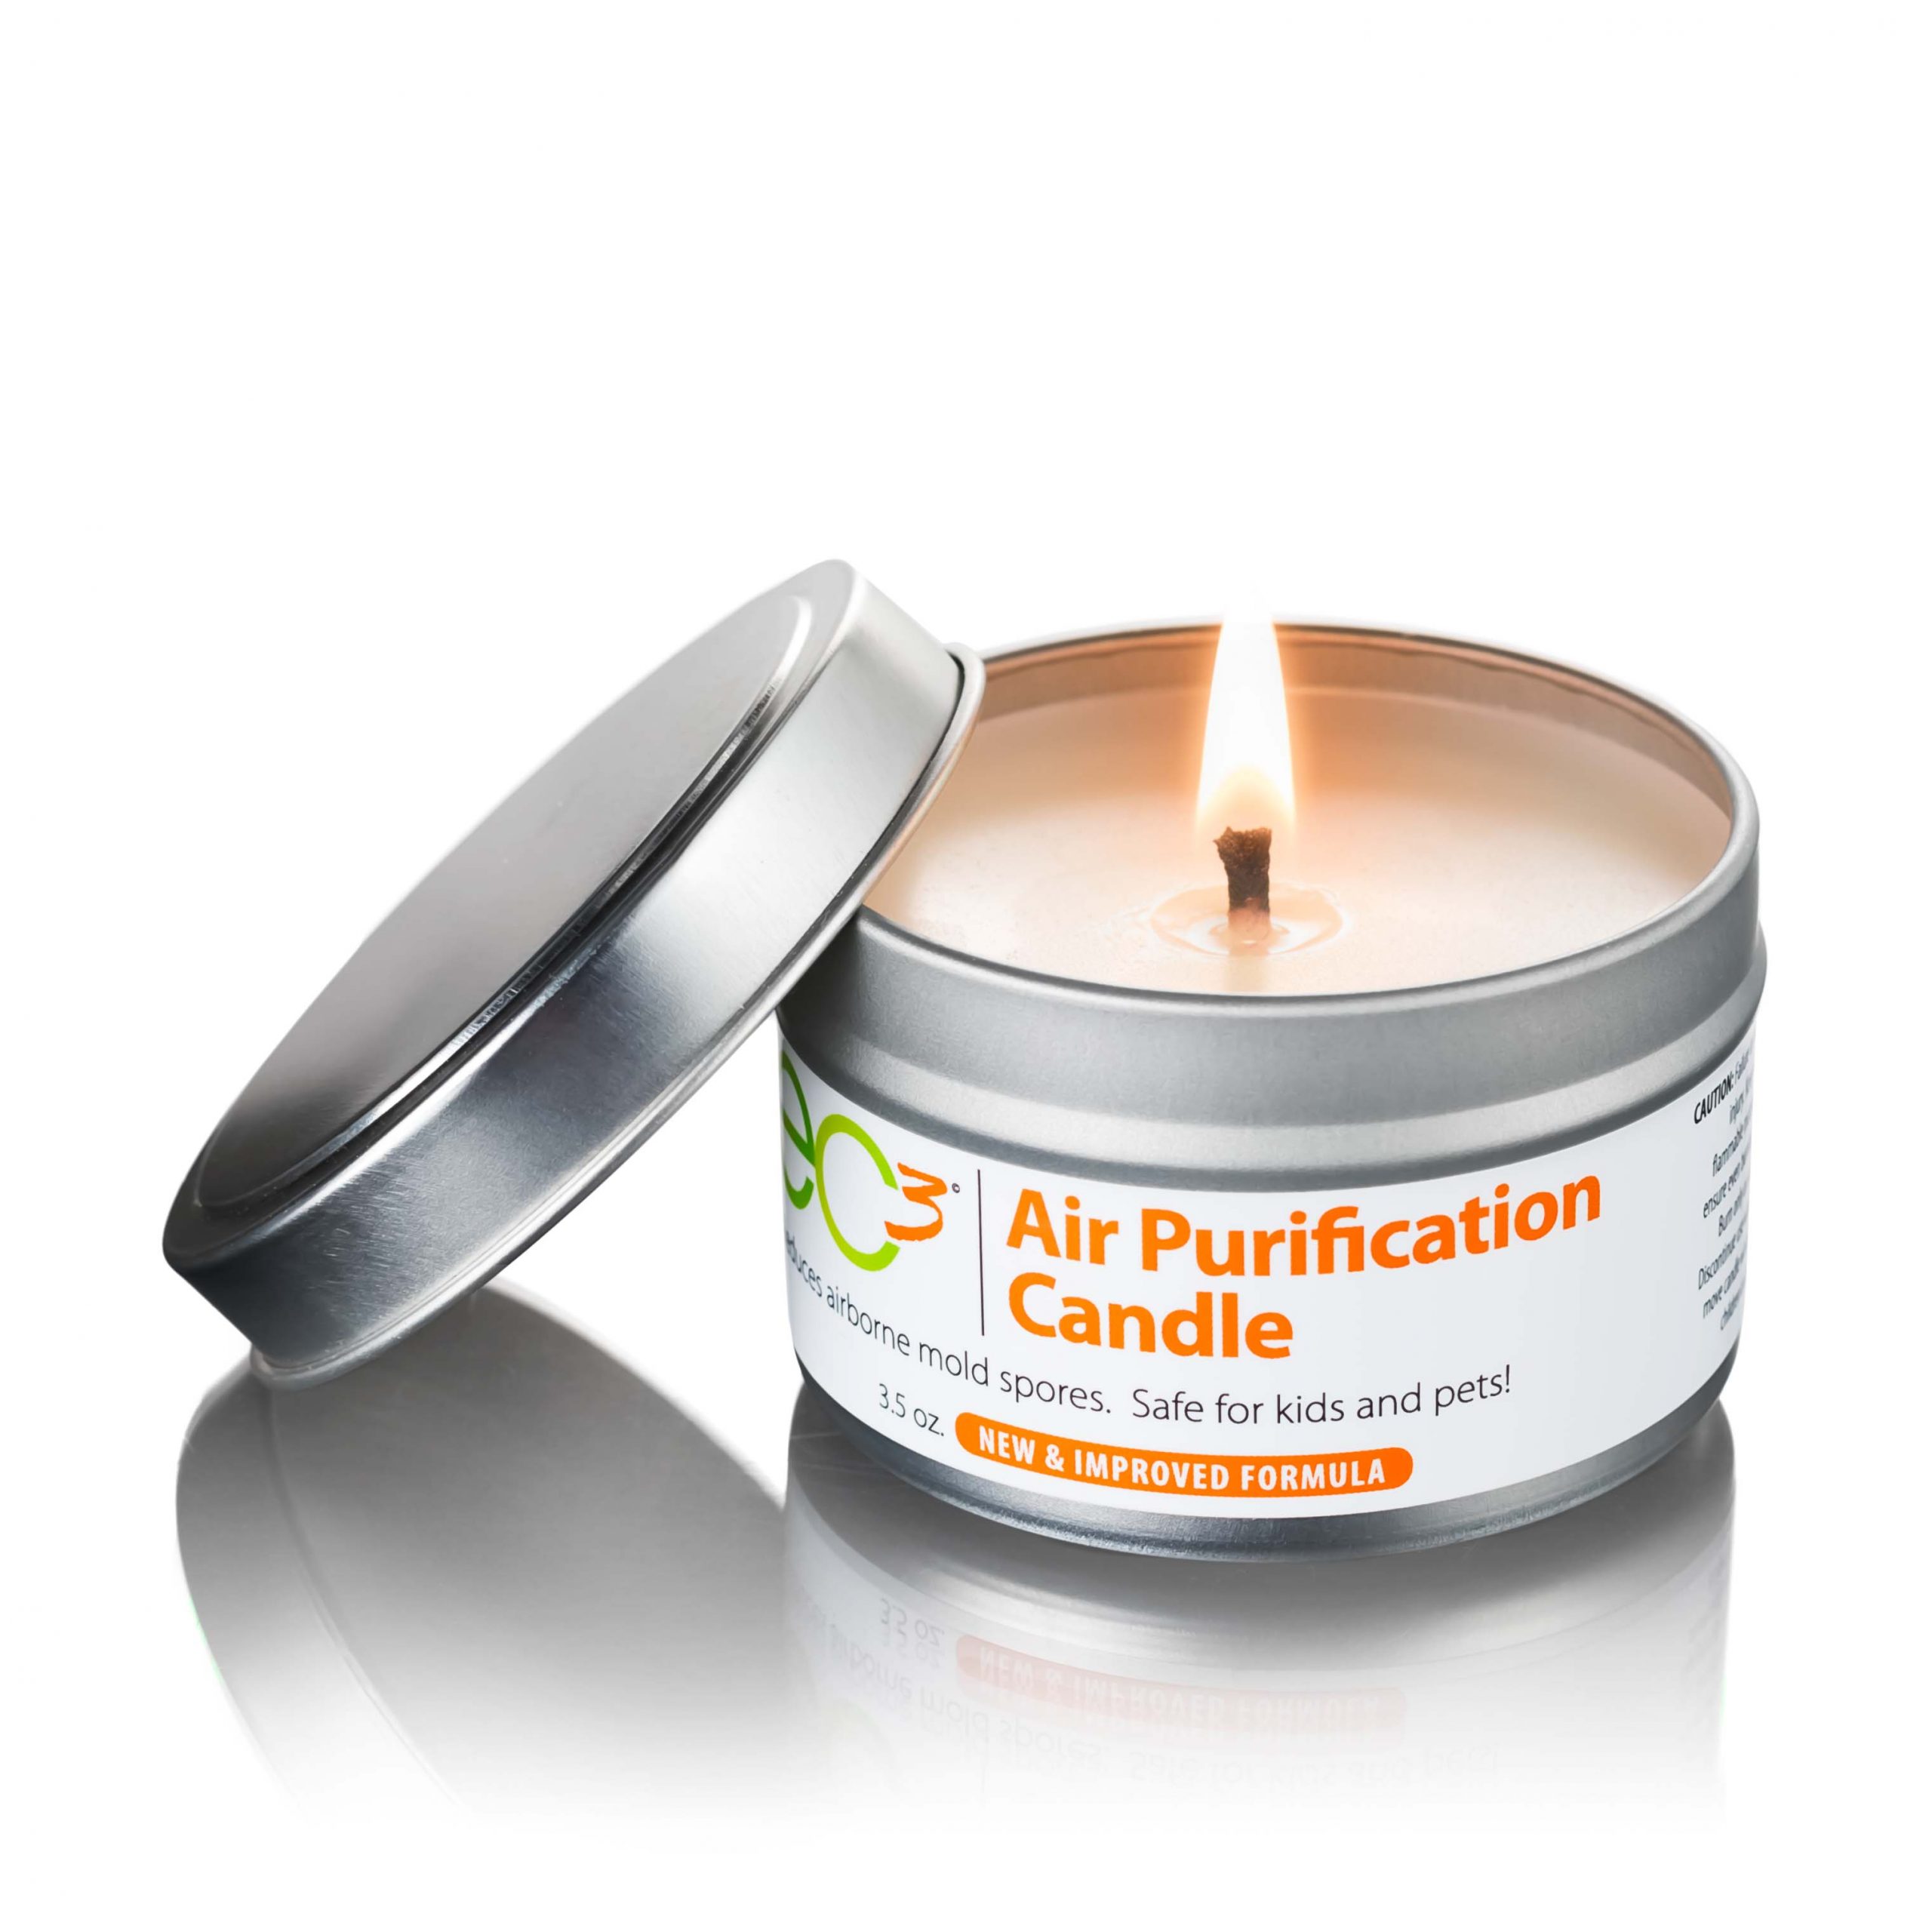 Question] EC3 Air Purification candles are a scam? I would like to